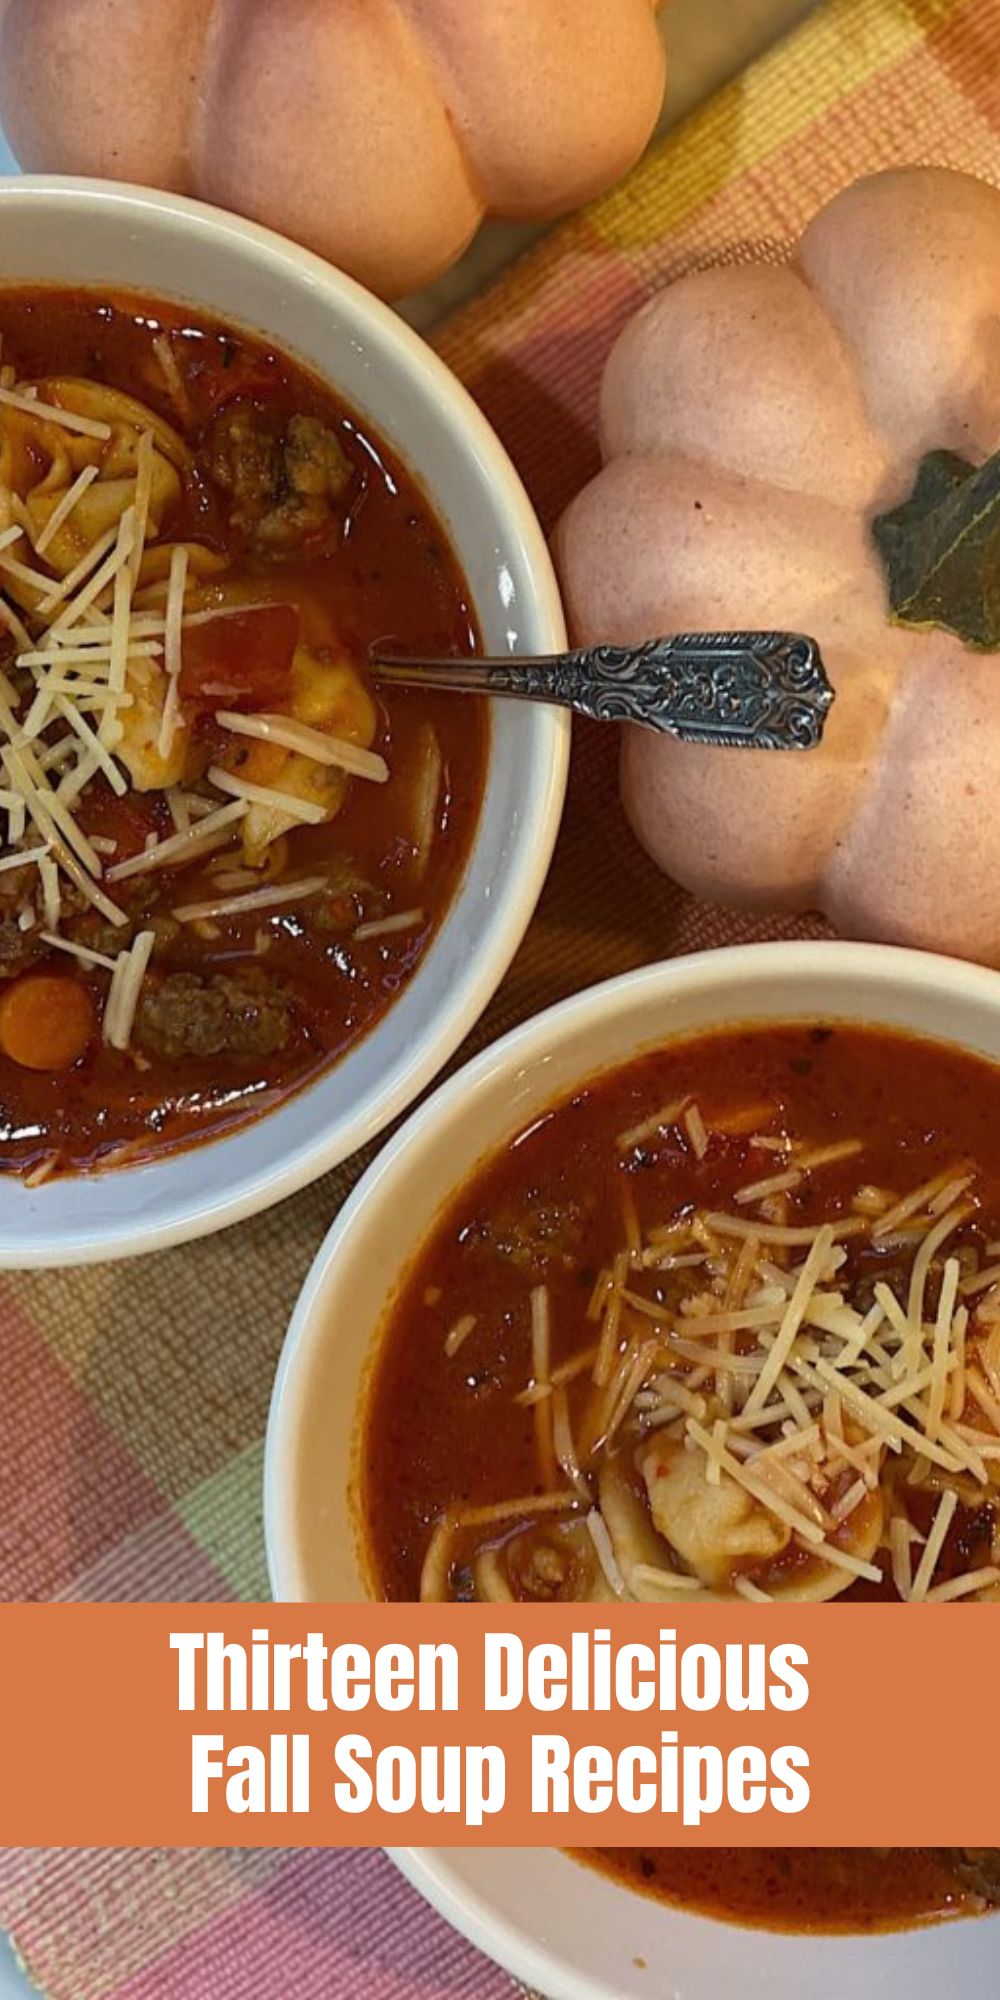 There is something about warm soup on a cold evening that warms you from the inside out. Check out these delicious fall soup recipes.